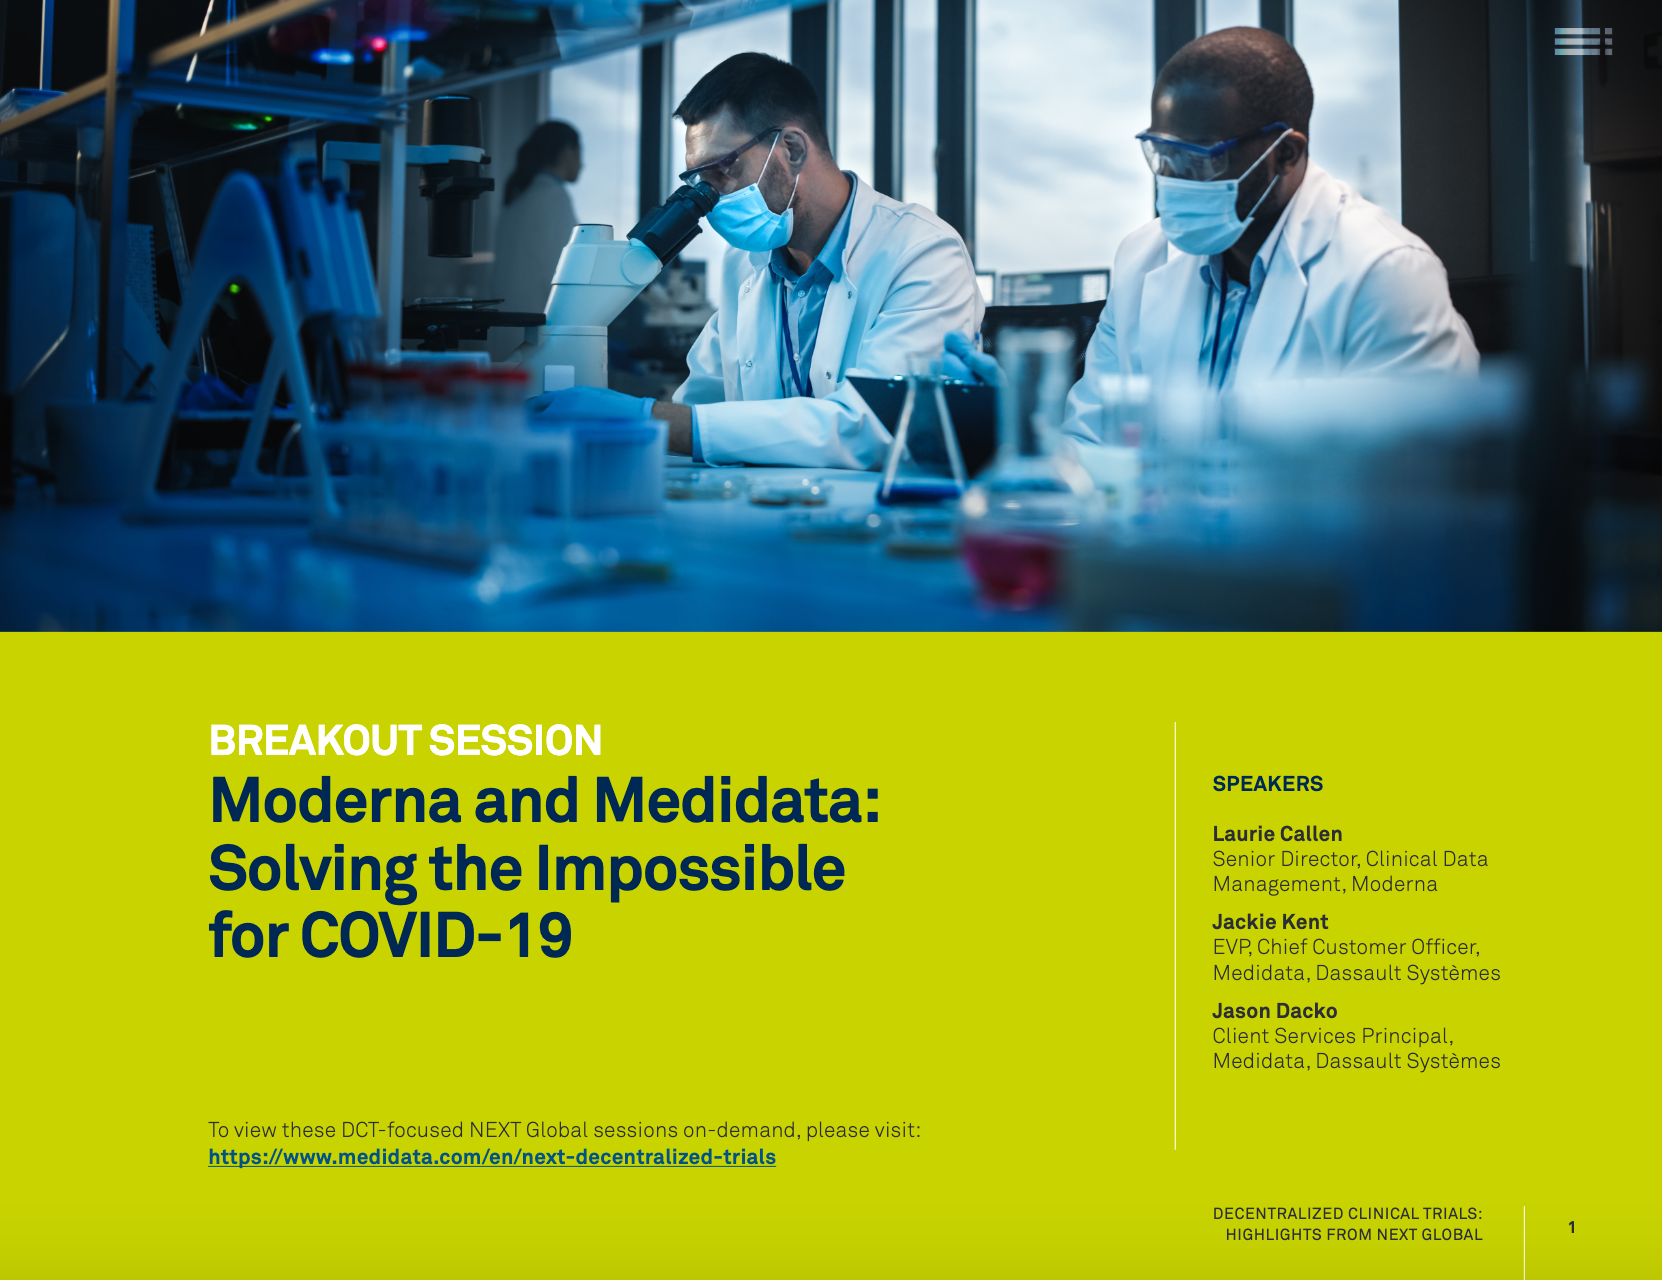 Key to Success: Medidata and Moderna Solving the Impossible for COVID-19